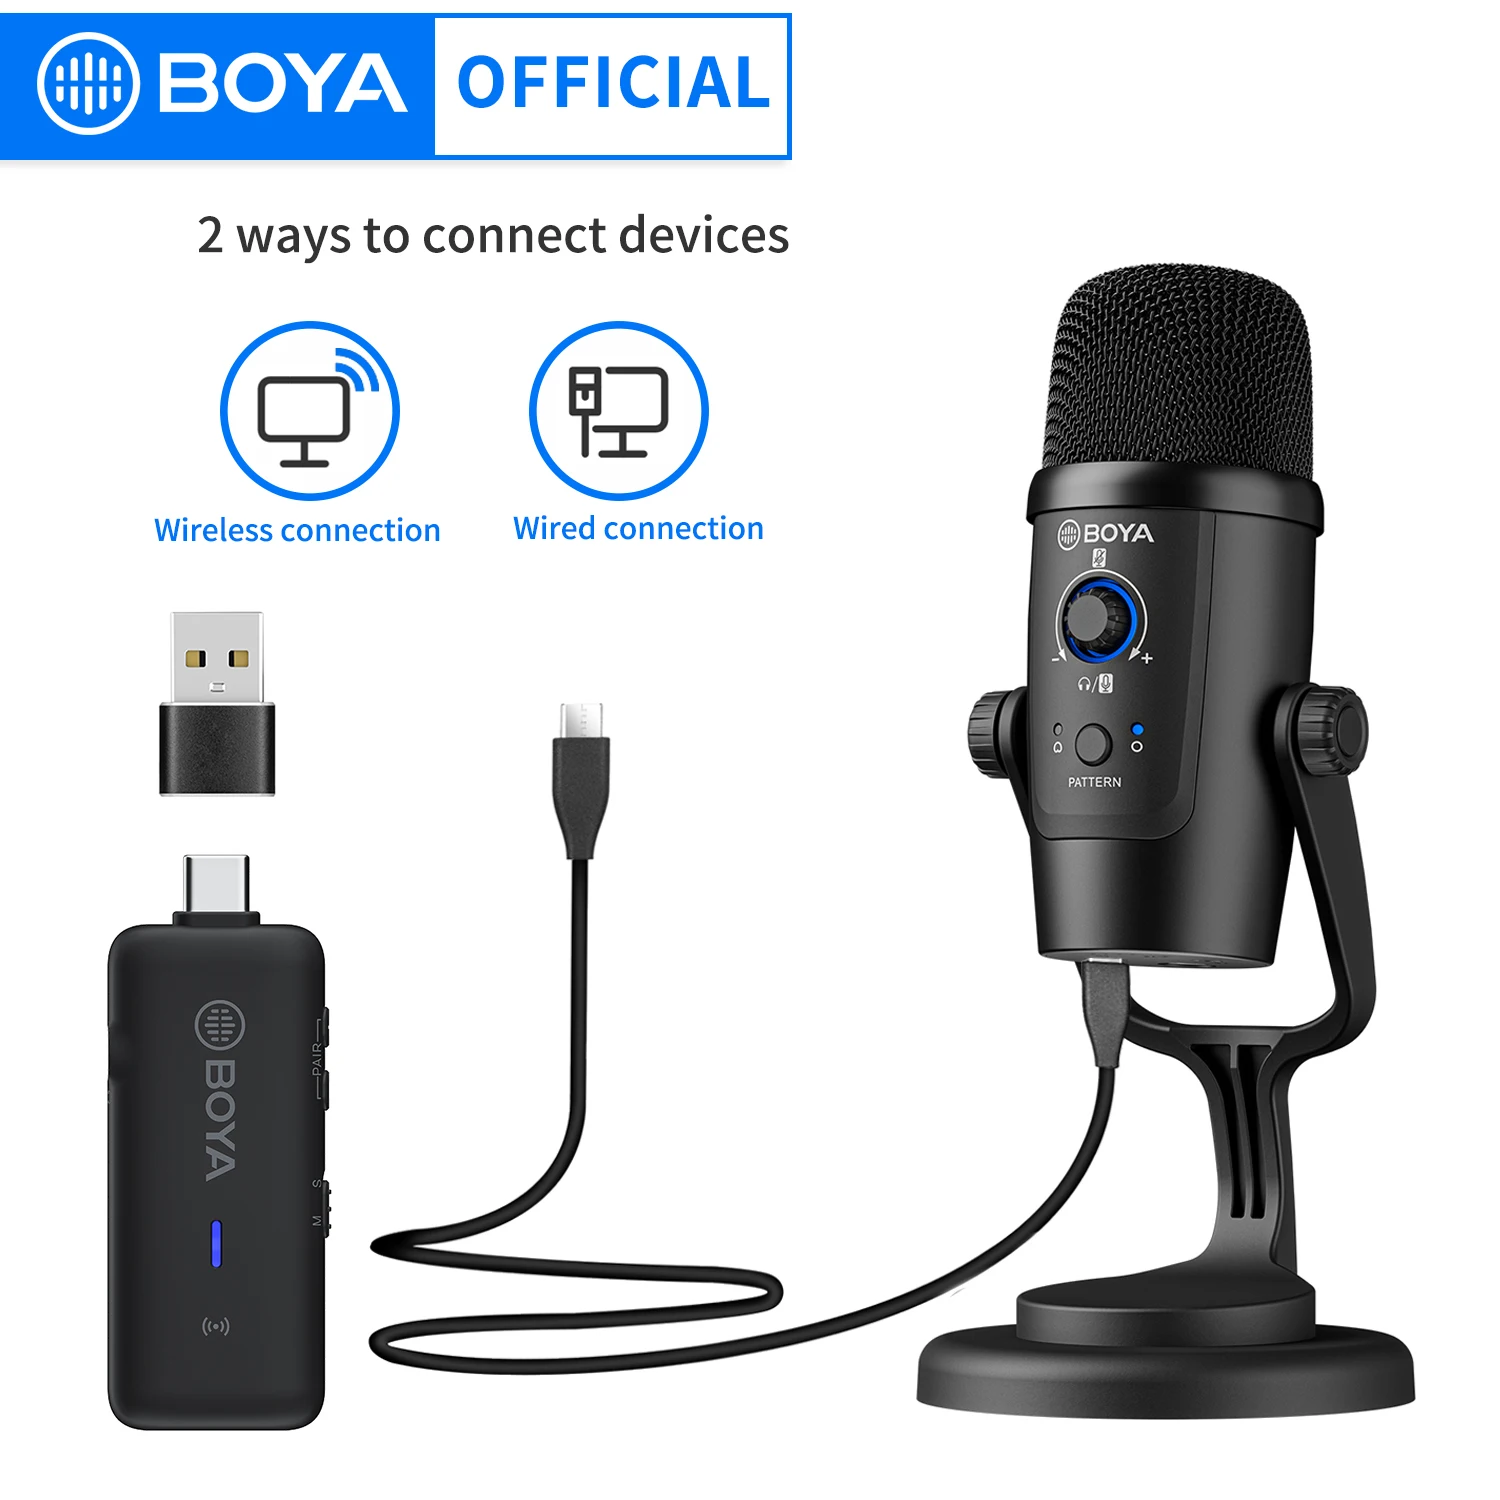 Boya Usb Condenser Wireless Microphone By-pm500w Professional Mic For Pc Laptop Streaming Recording Vocals Microphones - AliExpress